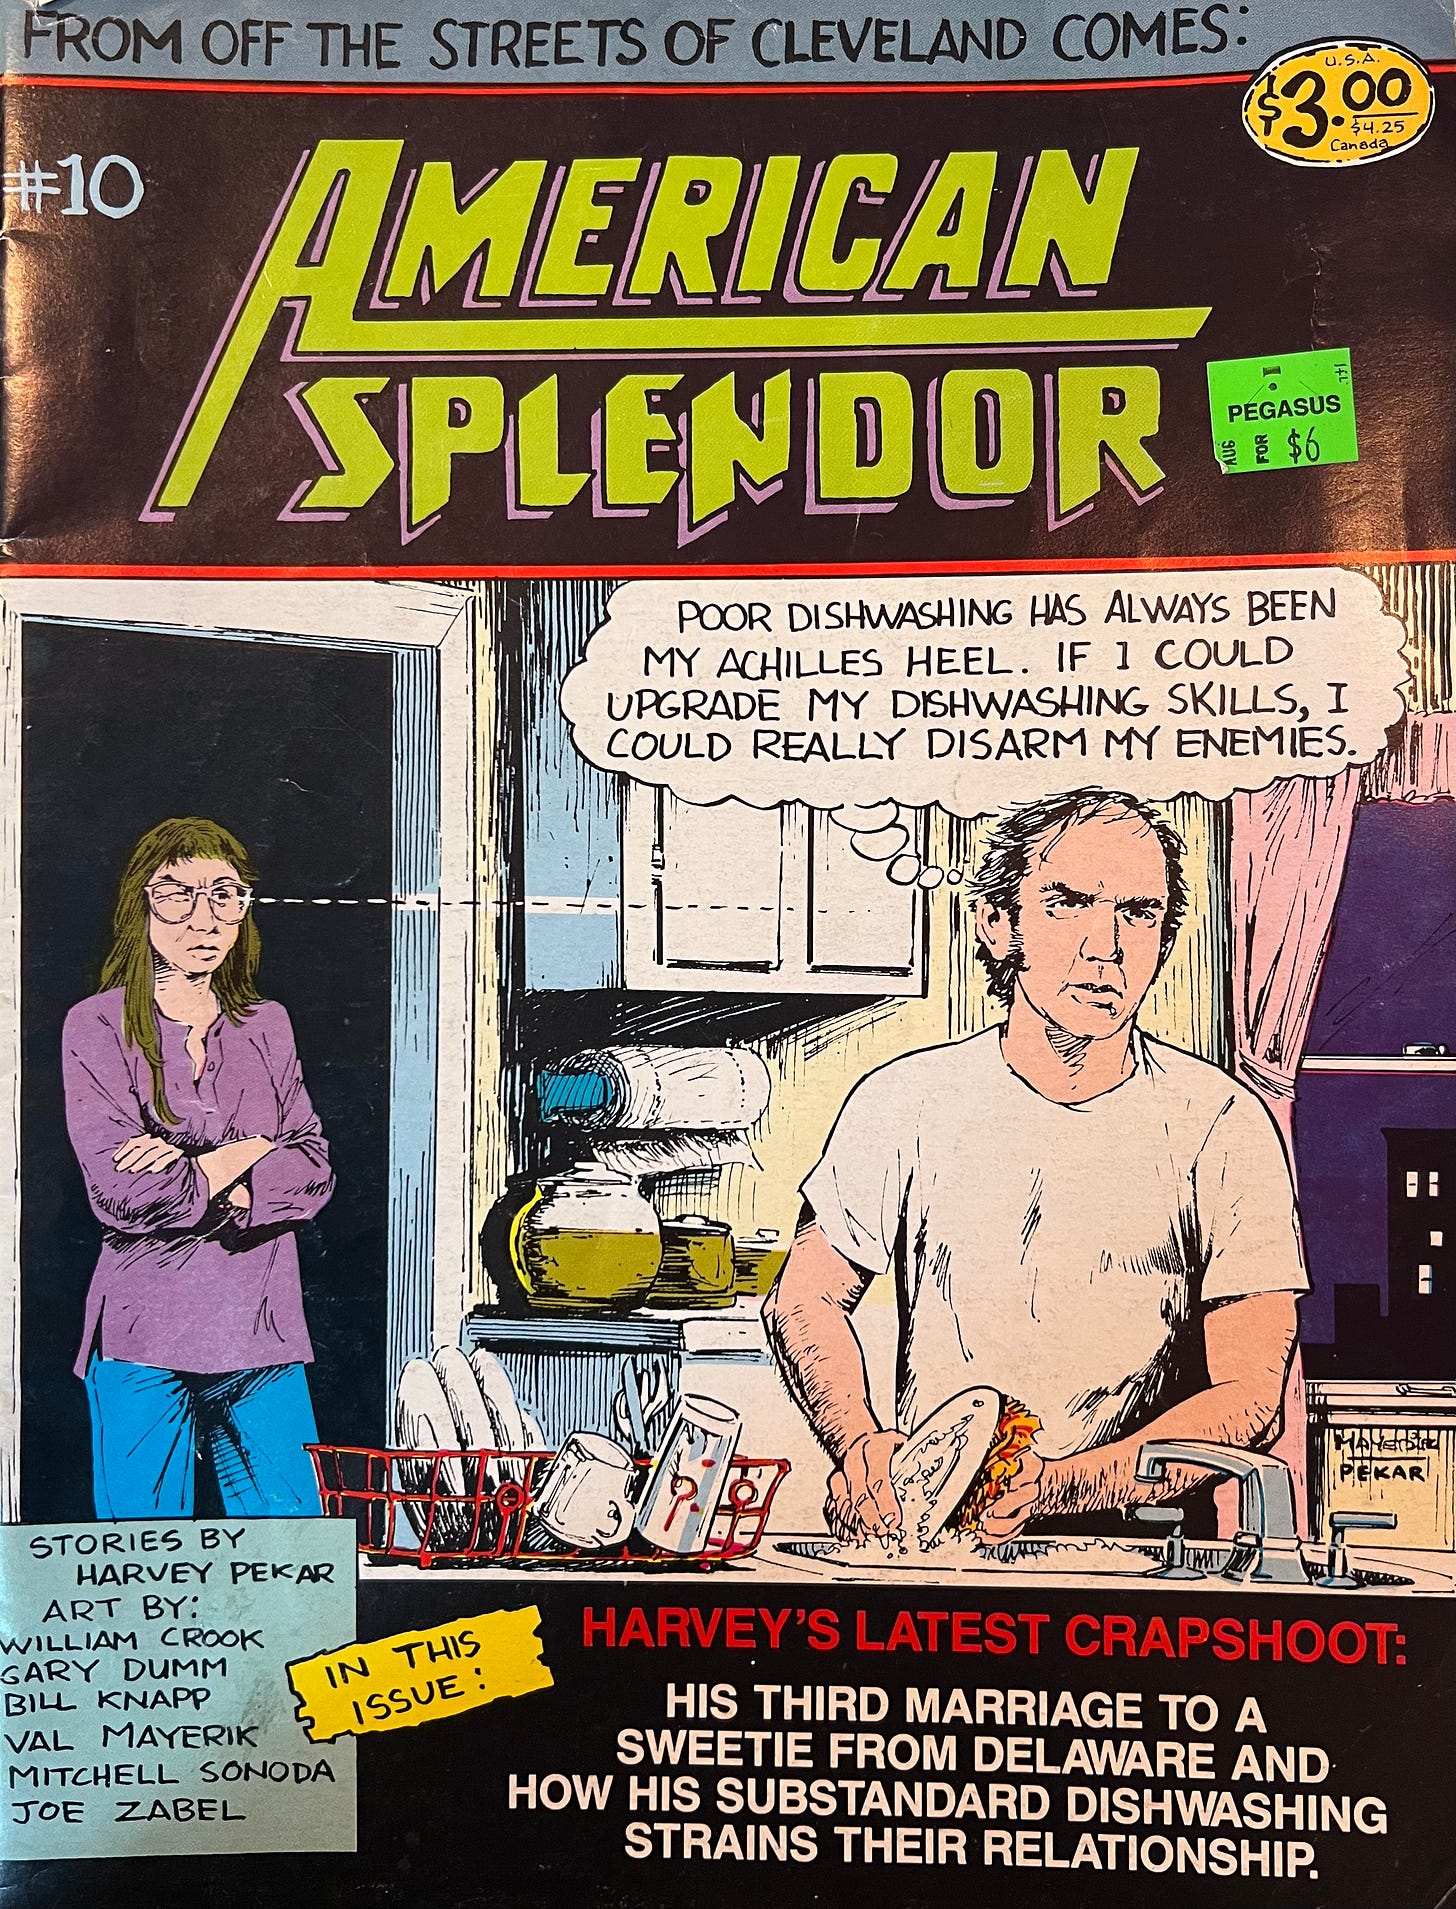 A cover of American Splendor #10, a stamp from Pegasus for $6. On the cover, Harvey is doing dishes, thinking to himself "Poor dishwashing has always been my achilles heel. If I could upgrade my dishwashing skills, I could really disarm my enemies."